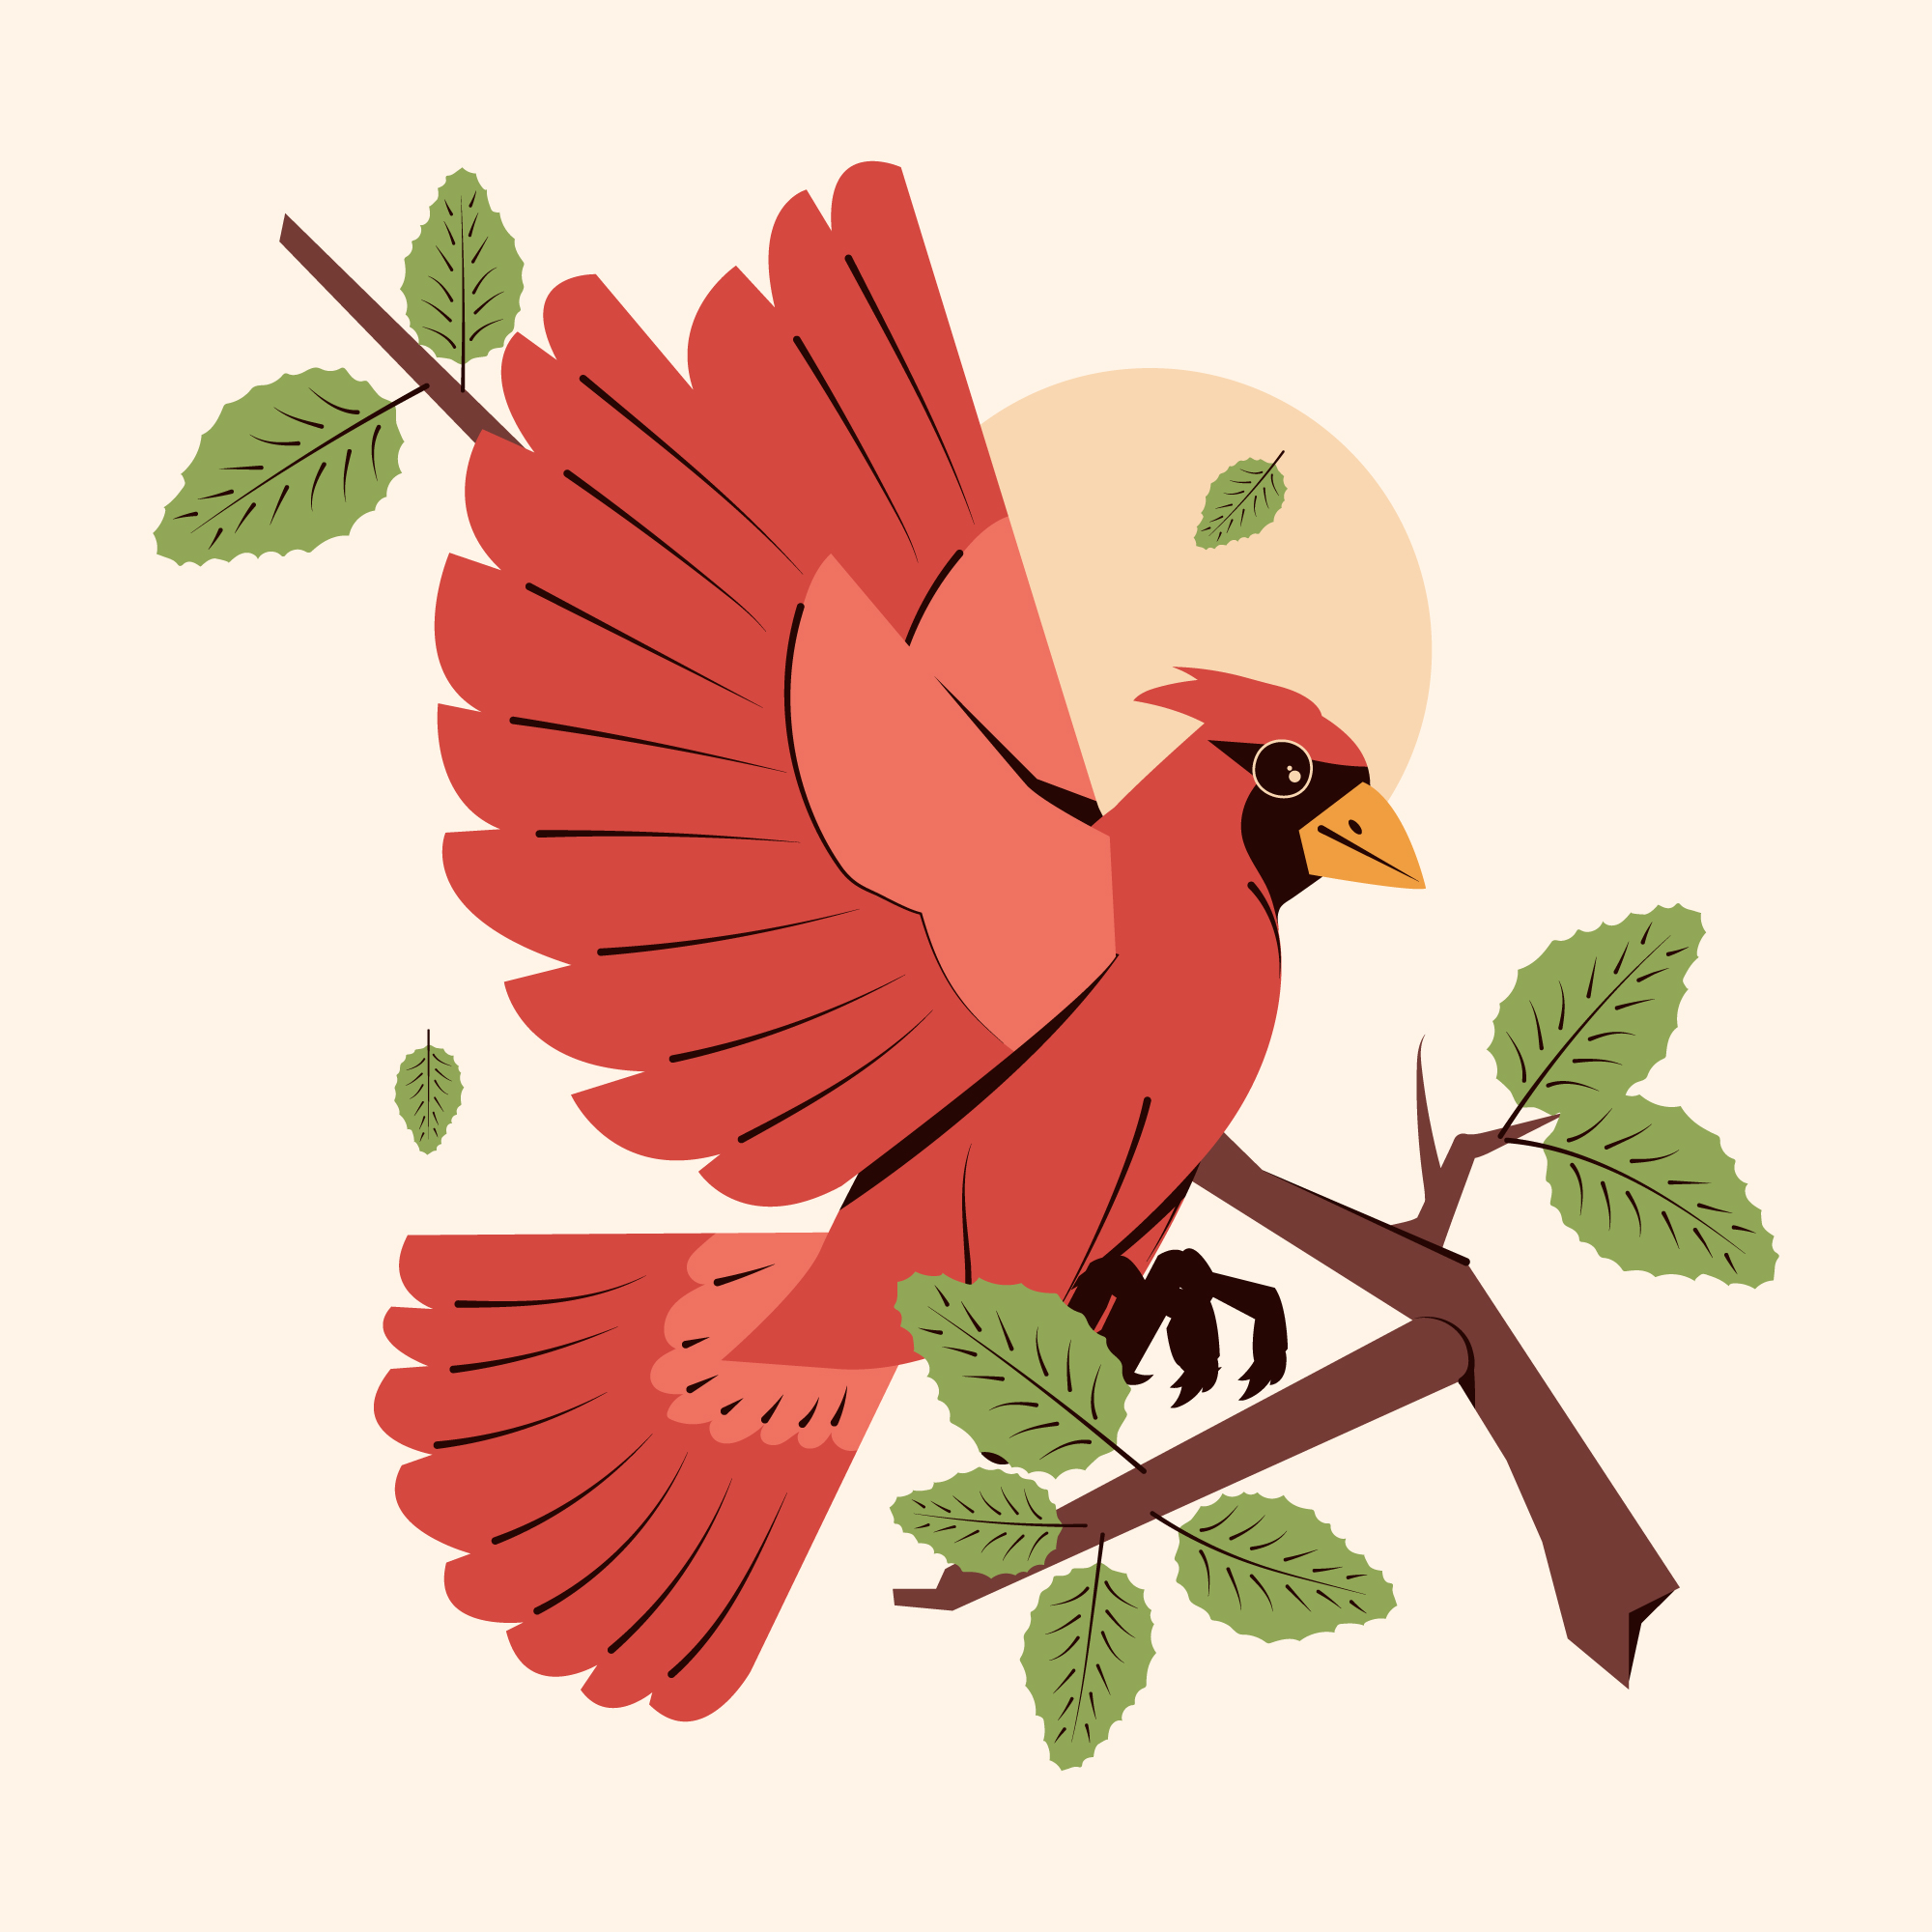 Cardinals Meaning In Spirituality - Why It's Important To Understand